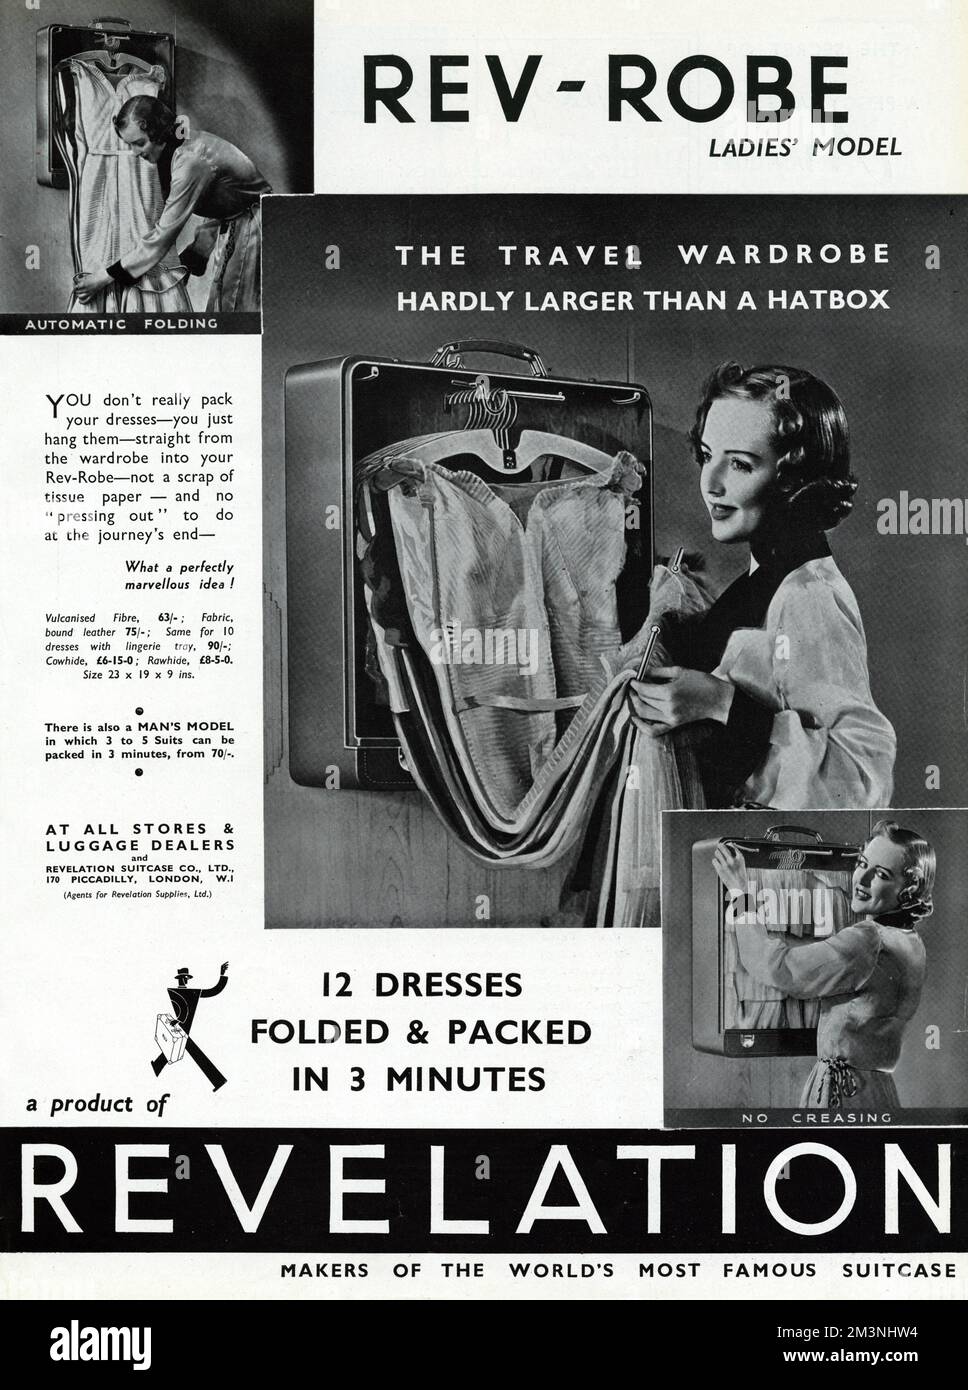 Advertisement for the Rev-Robe travel wardrobe (ladies' model), 'hardly larger than a hatbox' from Revelation, the makers of the world's most famous suitcase.  It allows you to hang your dresses straight from your wardrobe into your Rev-Robe with no pressing out to be done at the end of your journey.  Simply brilliant.  Wonder if it really worked.  1938 Stock Photo